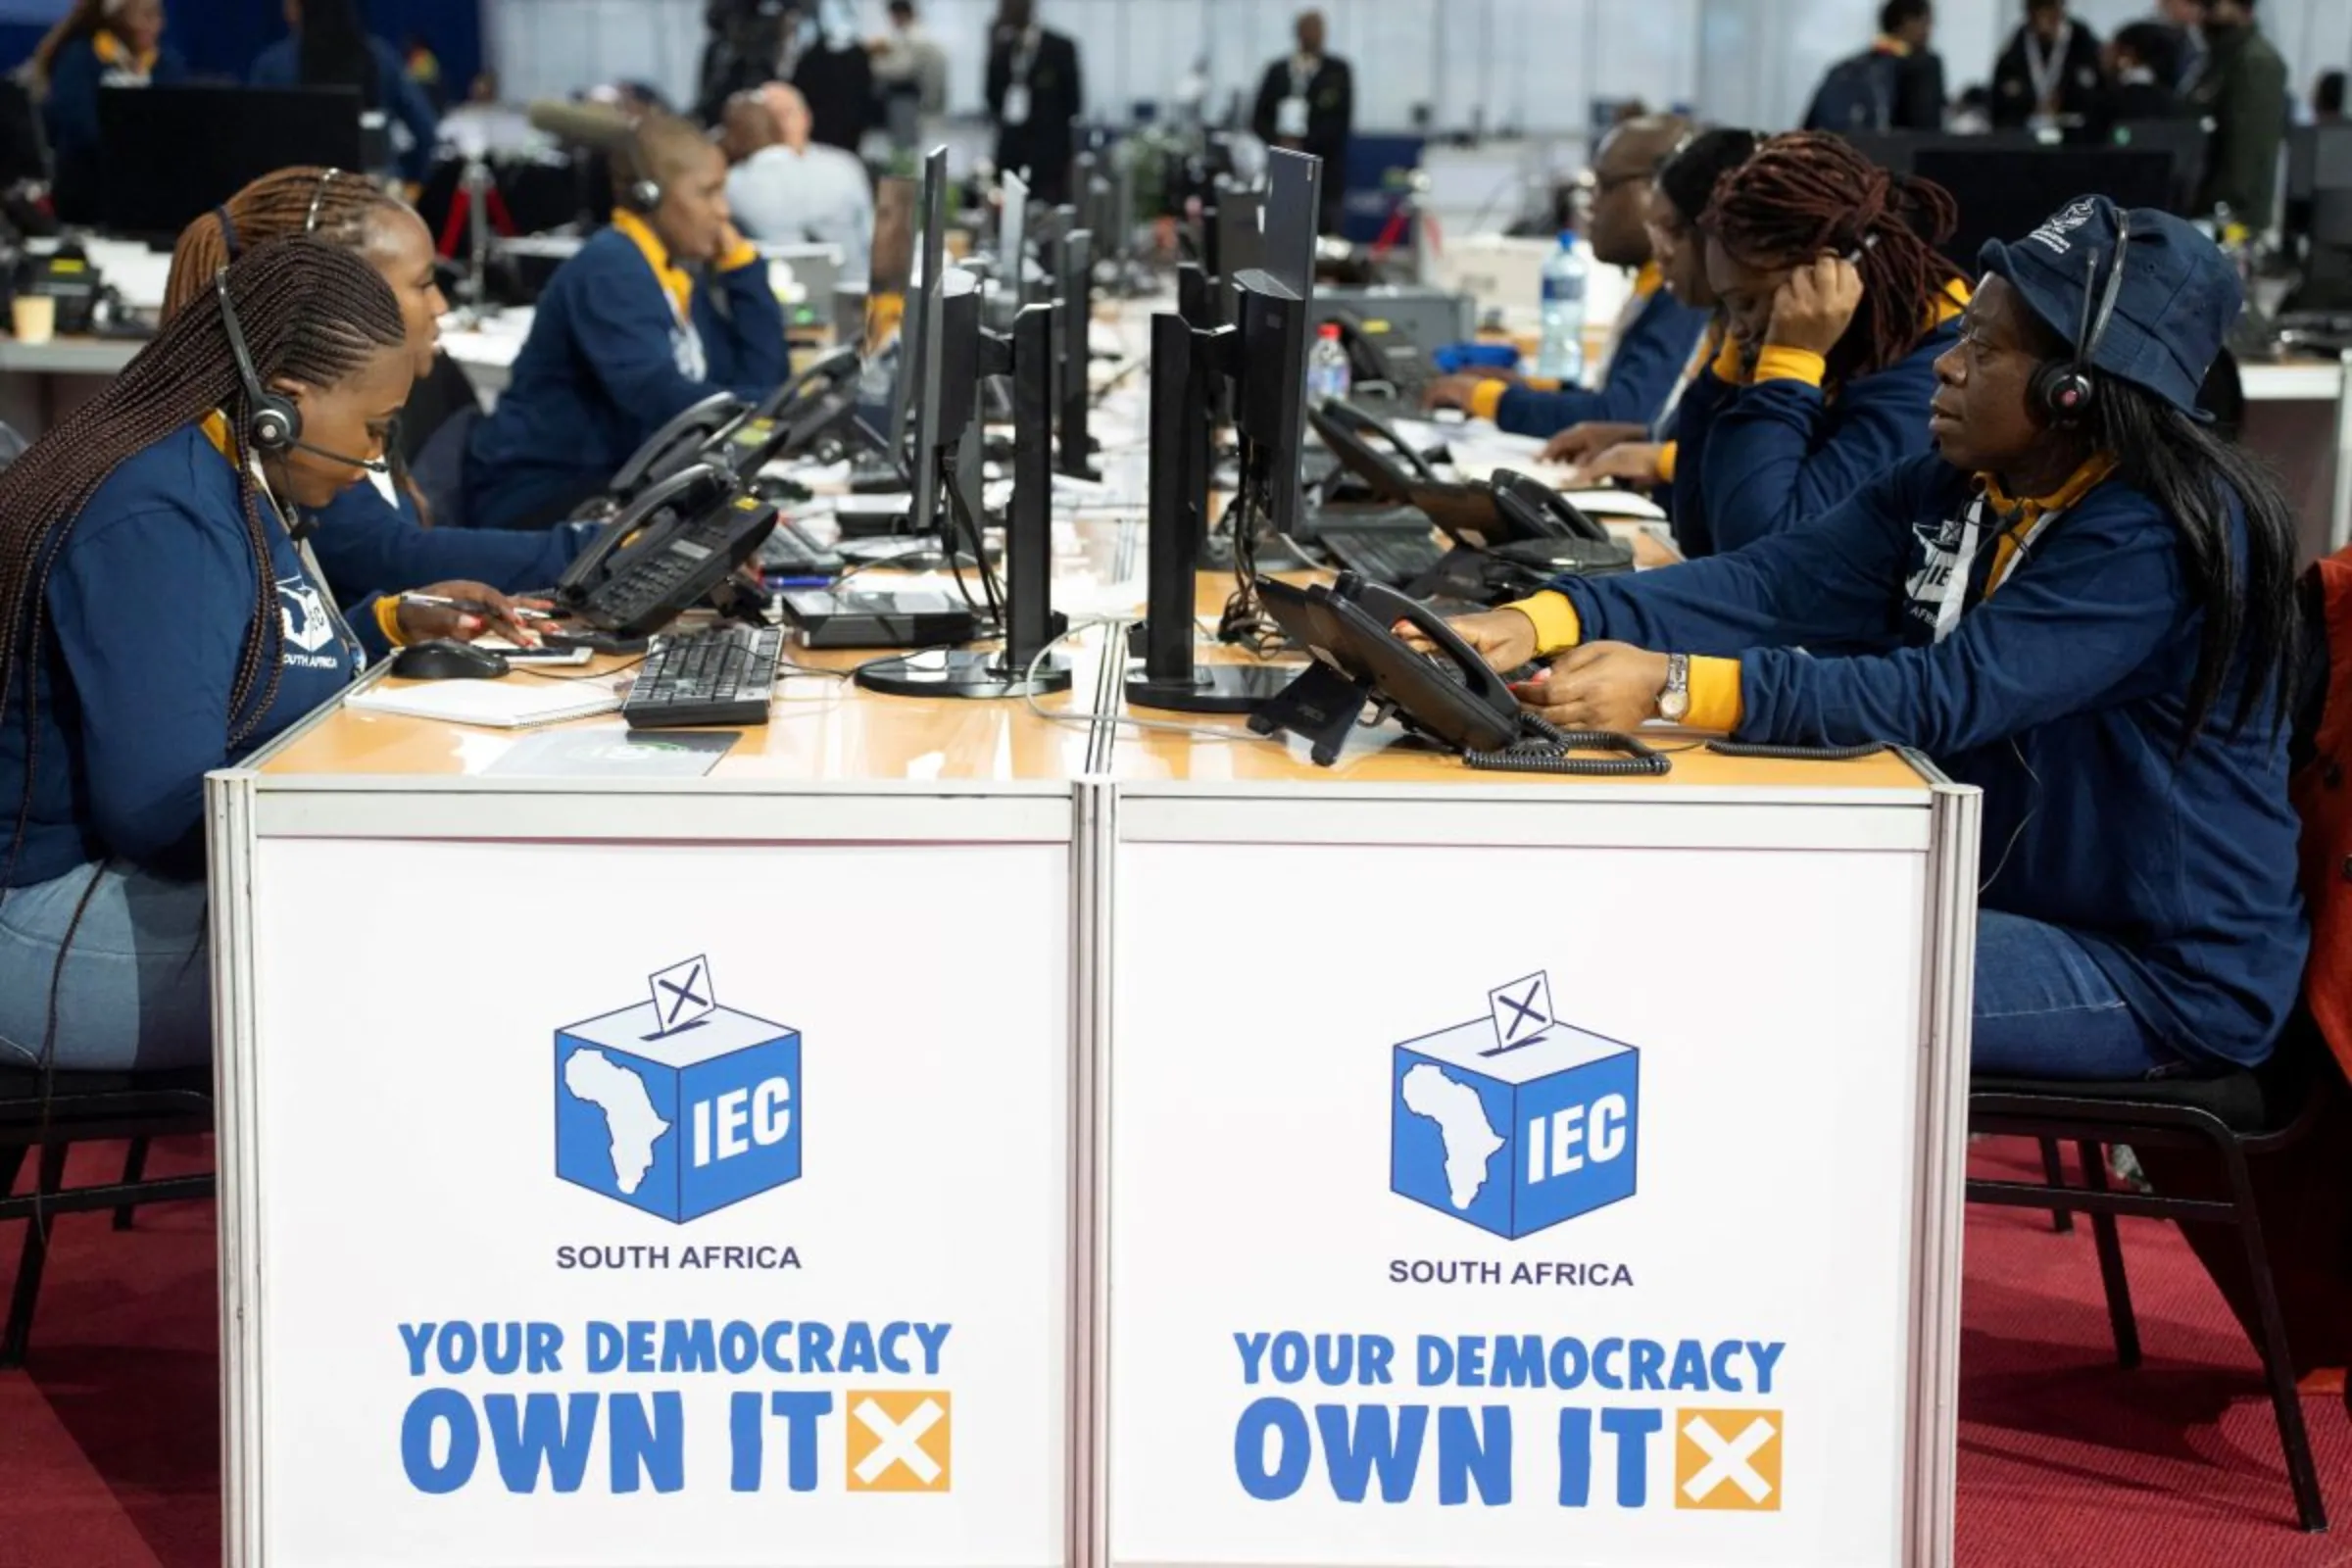 Workers from the Independent Electoral Commission work at their desks at the national results operations centre as they await the conclusion of the voting process, in Midrand, South Africa May 29, 2024. REUTERS/Ihsaan Haffejee